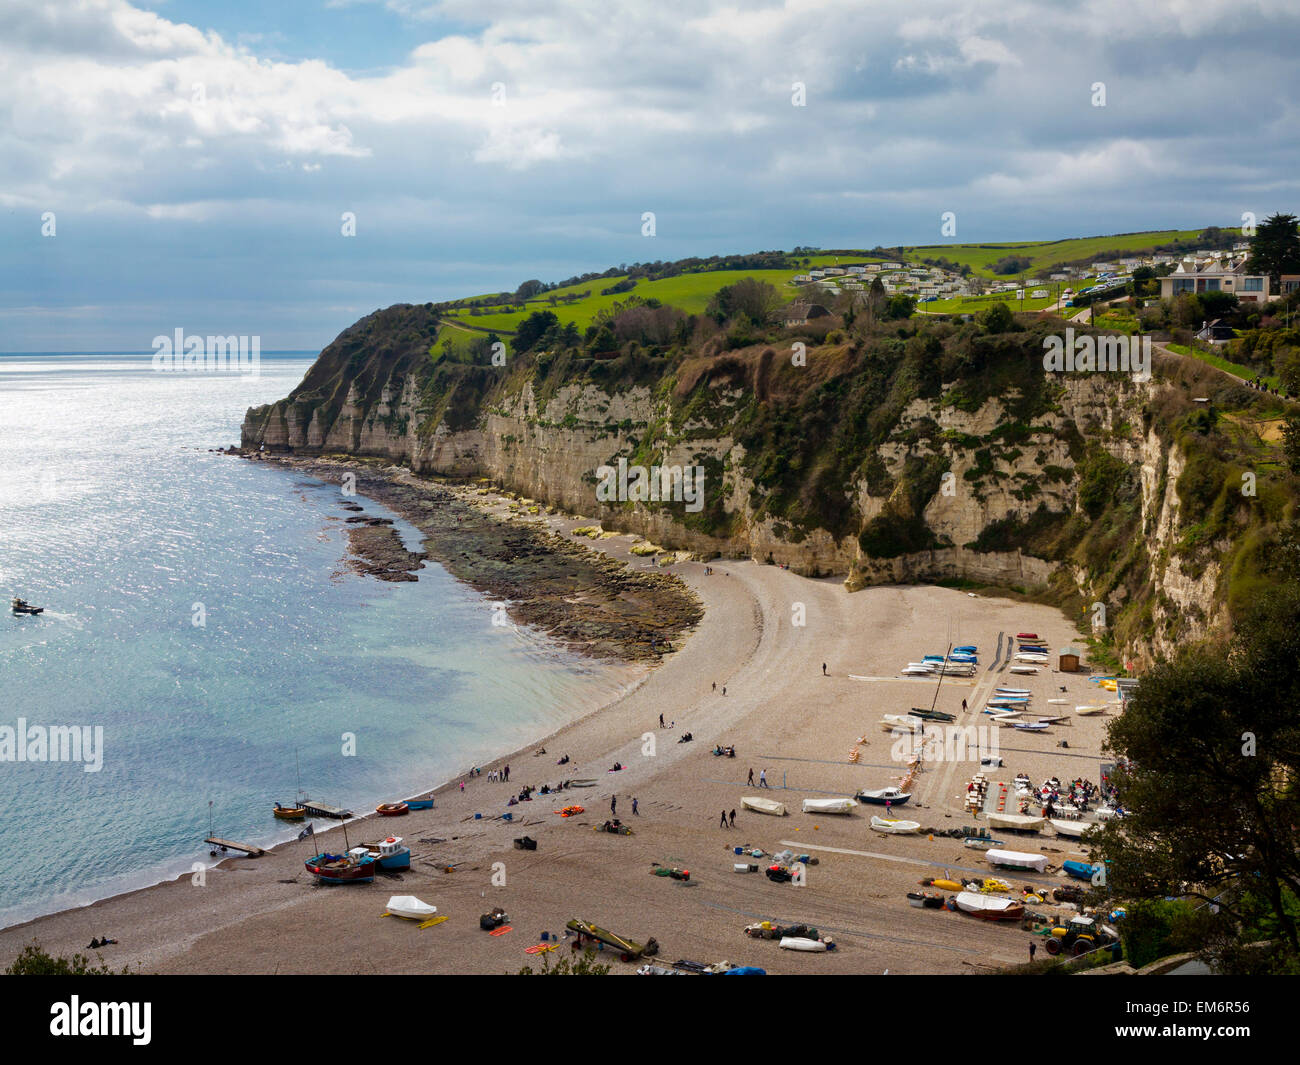 View looking down on the beach at Beer a small seaside resort on the south Devon coast England UK Stock Photo